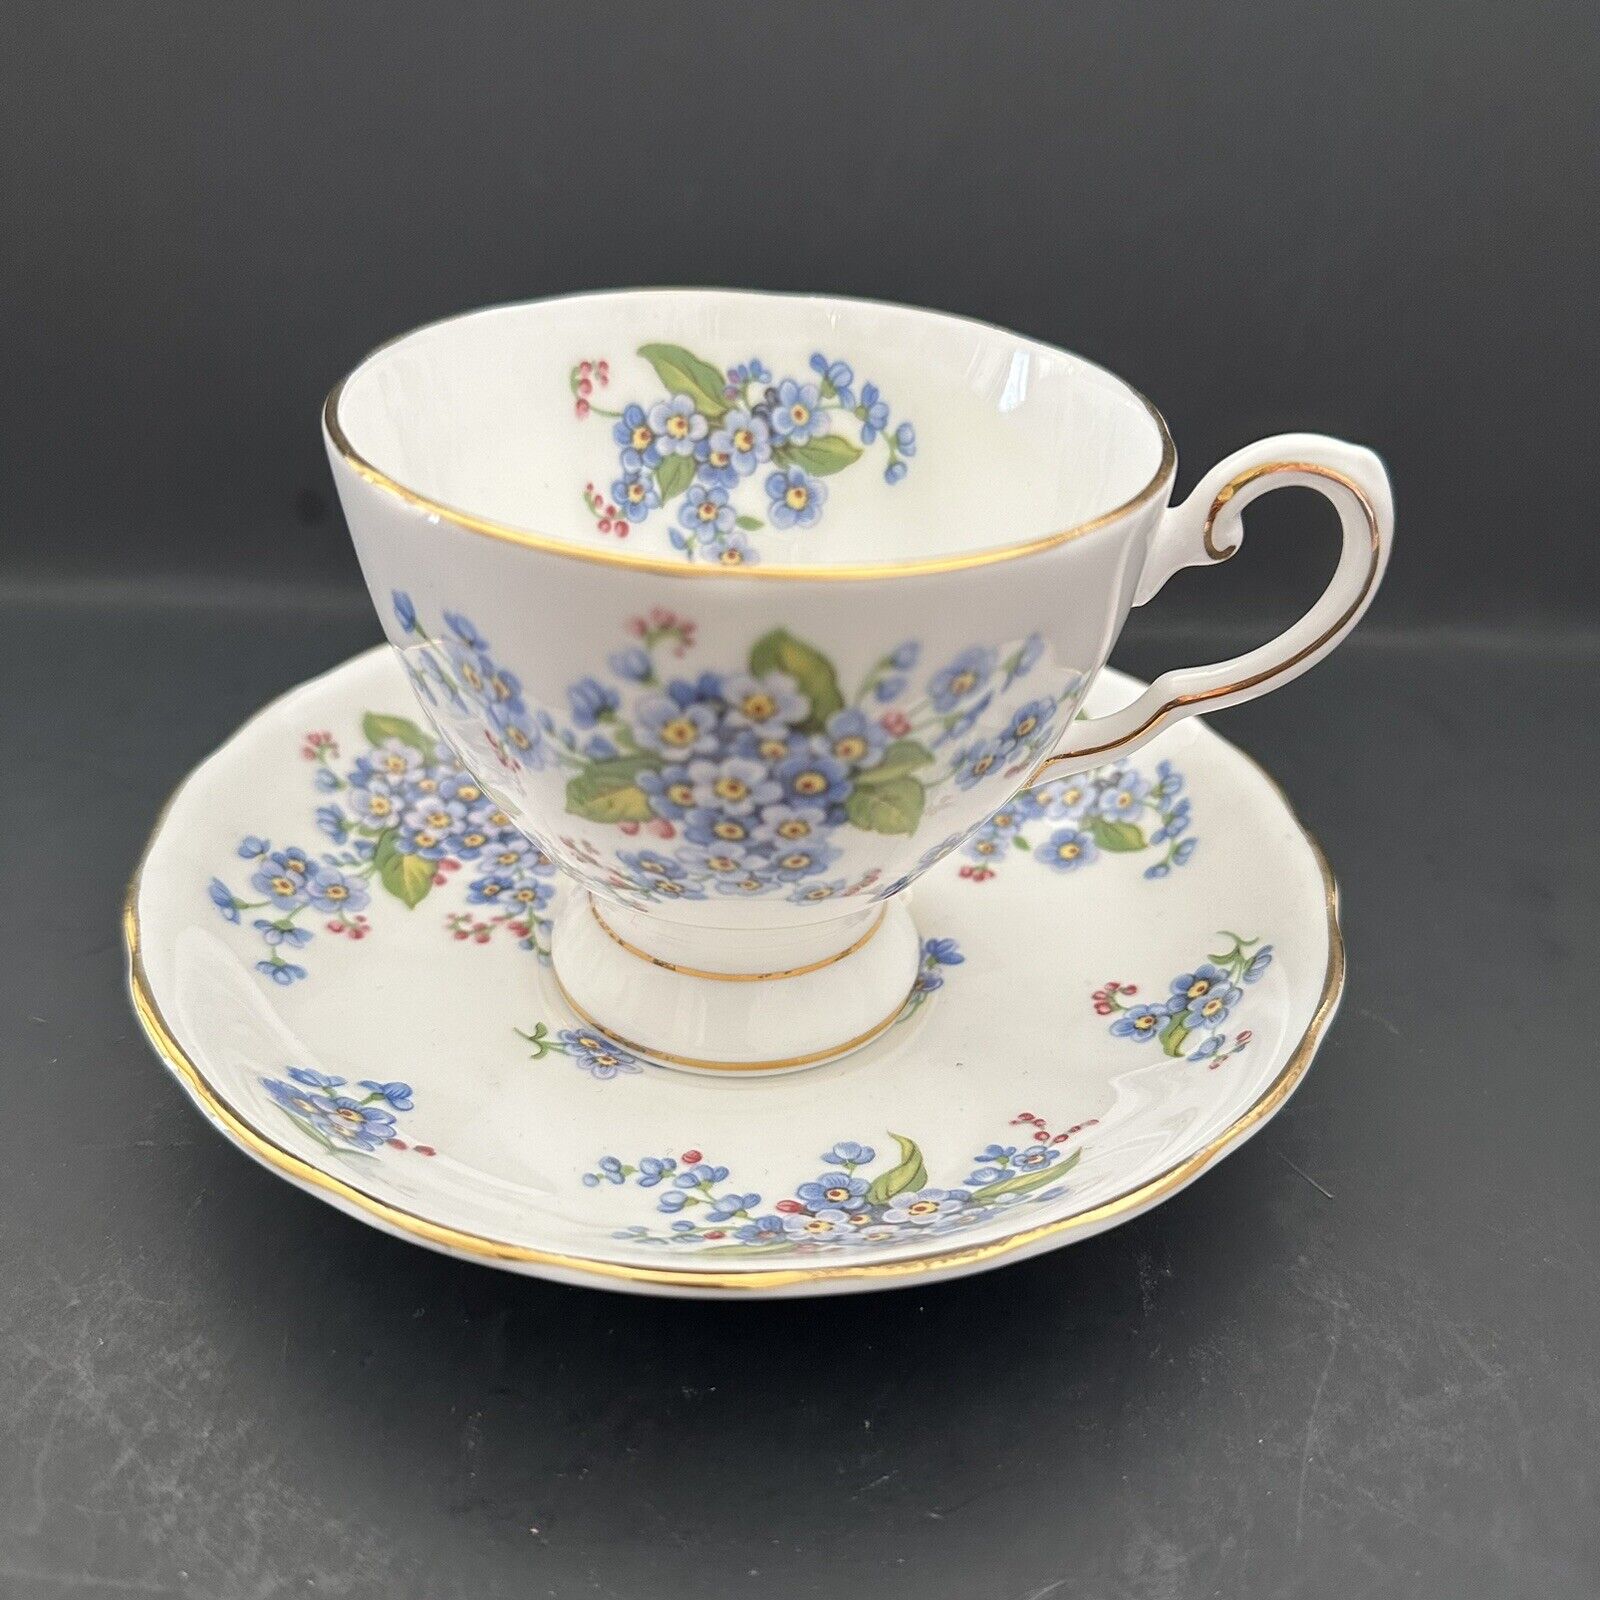 Tuscan Fine Bone China \'Forget Me Not\' Footed Teacup & Saucer Set